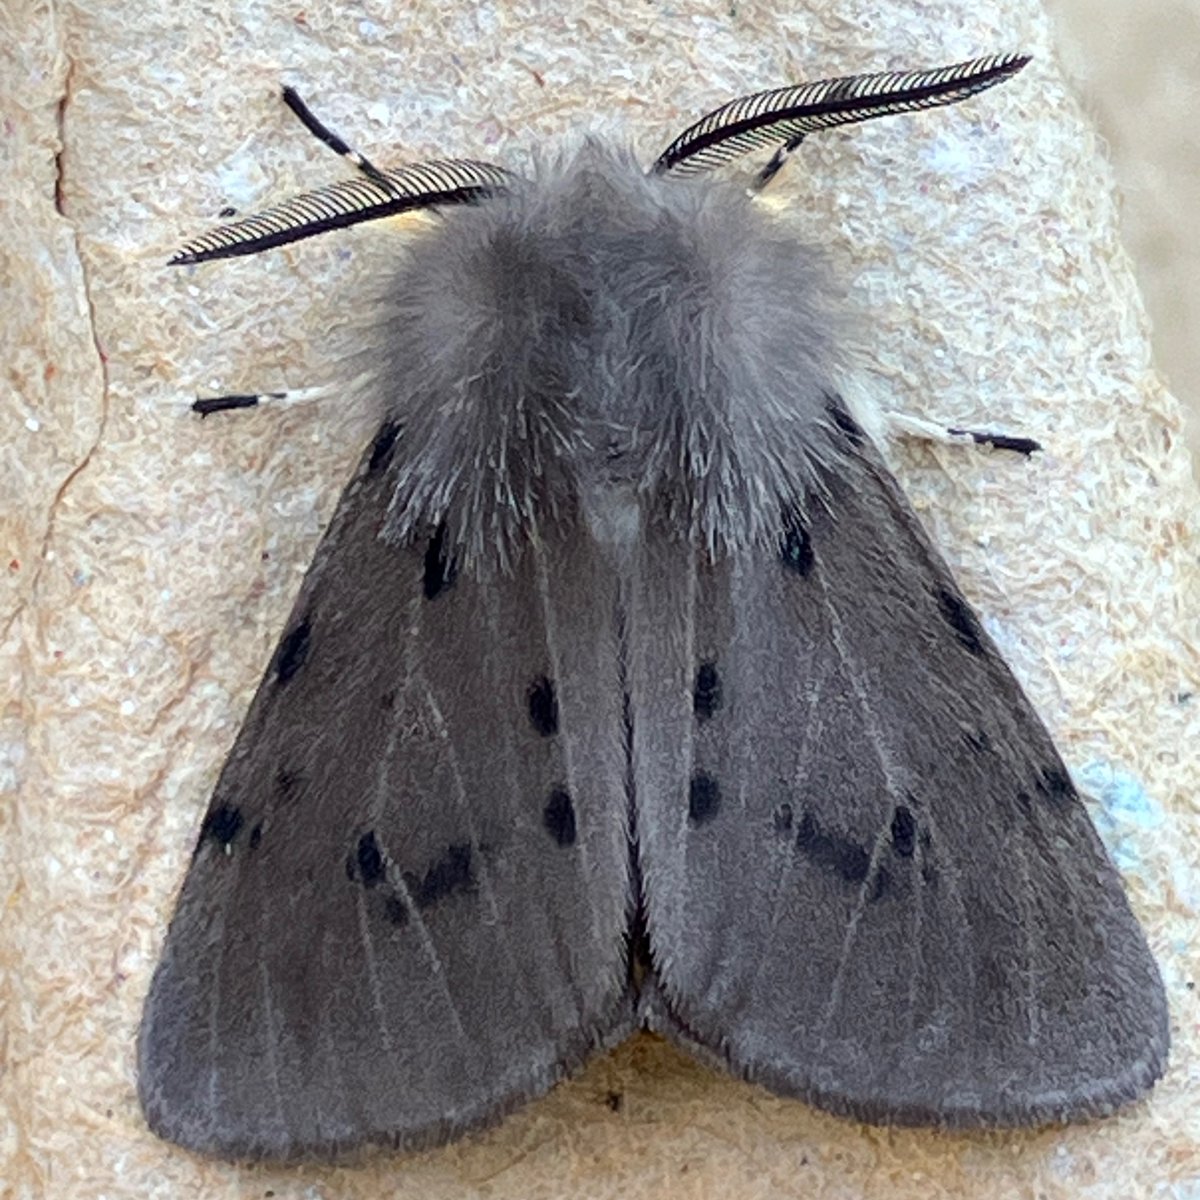 Male Muslin Moth- a symphony in muted velvet buffs and greys, he has a deep fur stole around his midriff to protect against the chill spring nights. #mothsmatter